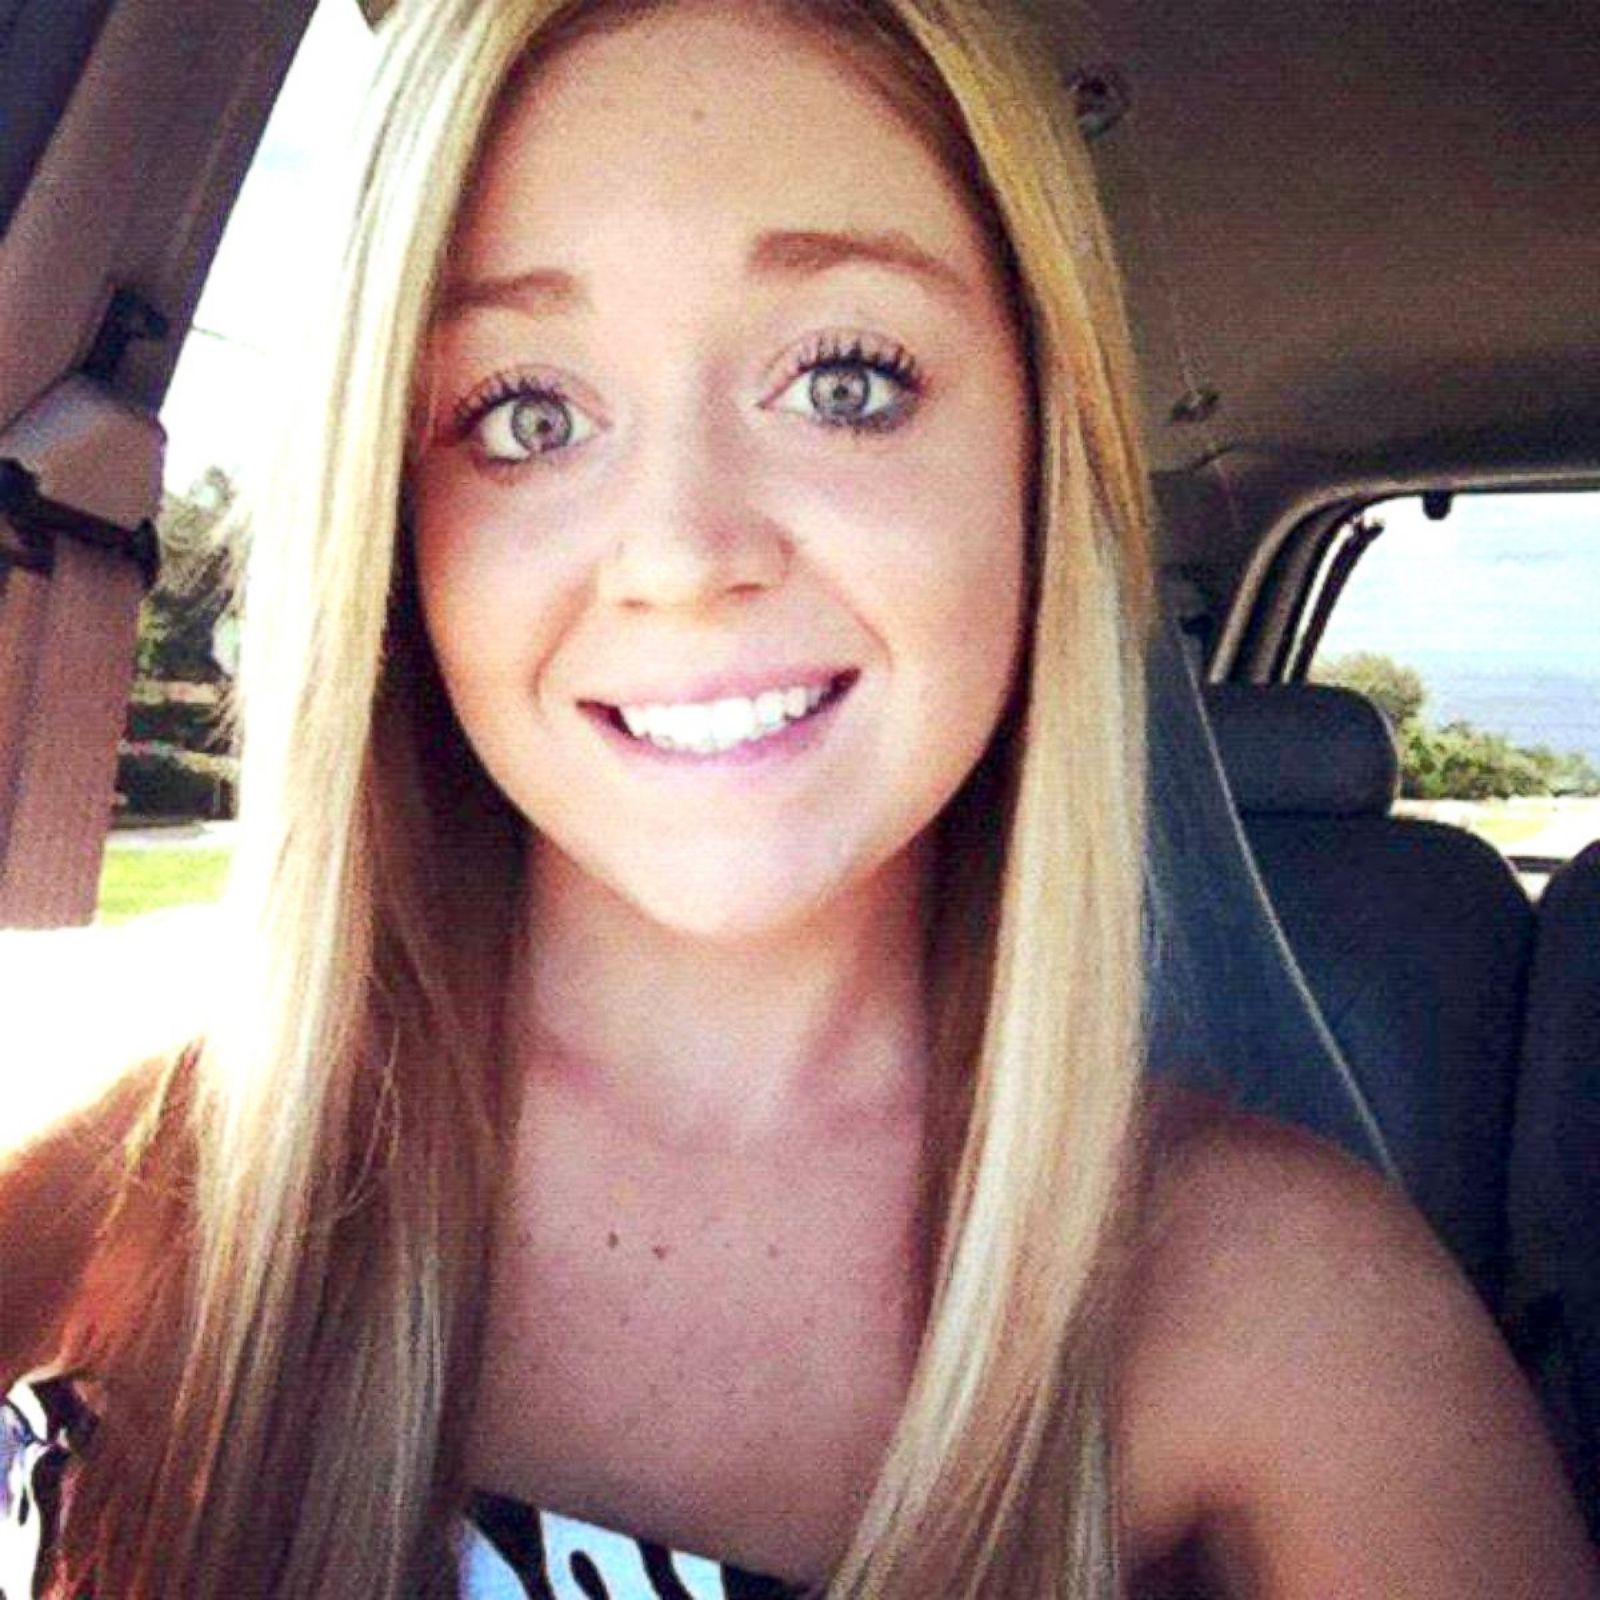 From Cheerleader to Inmate How Teens Relationship With Underage Girlfriend Landed Her in Jail